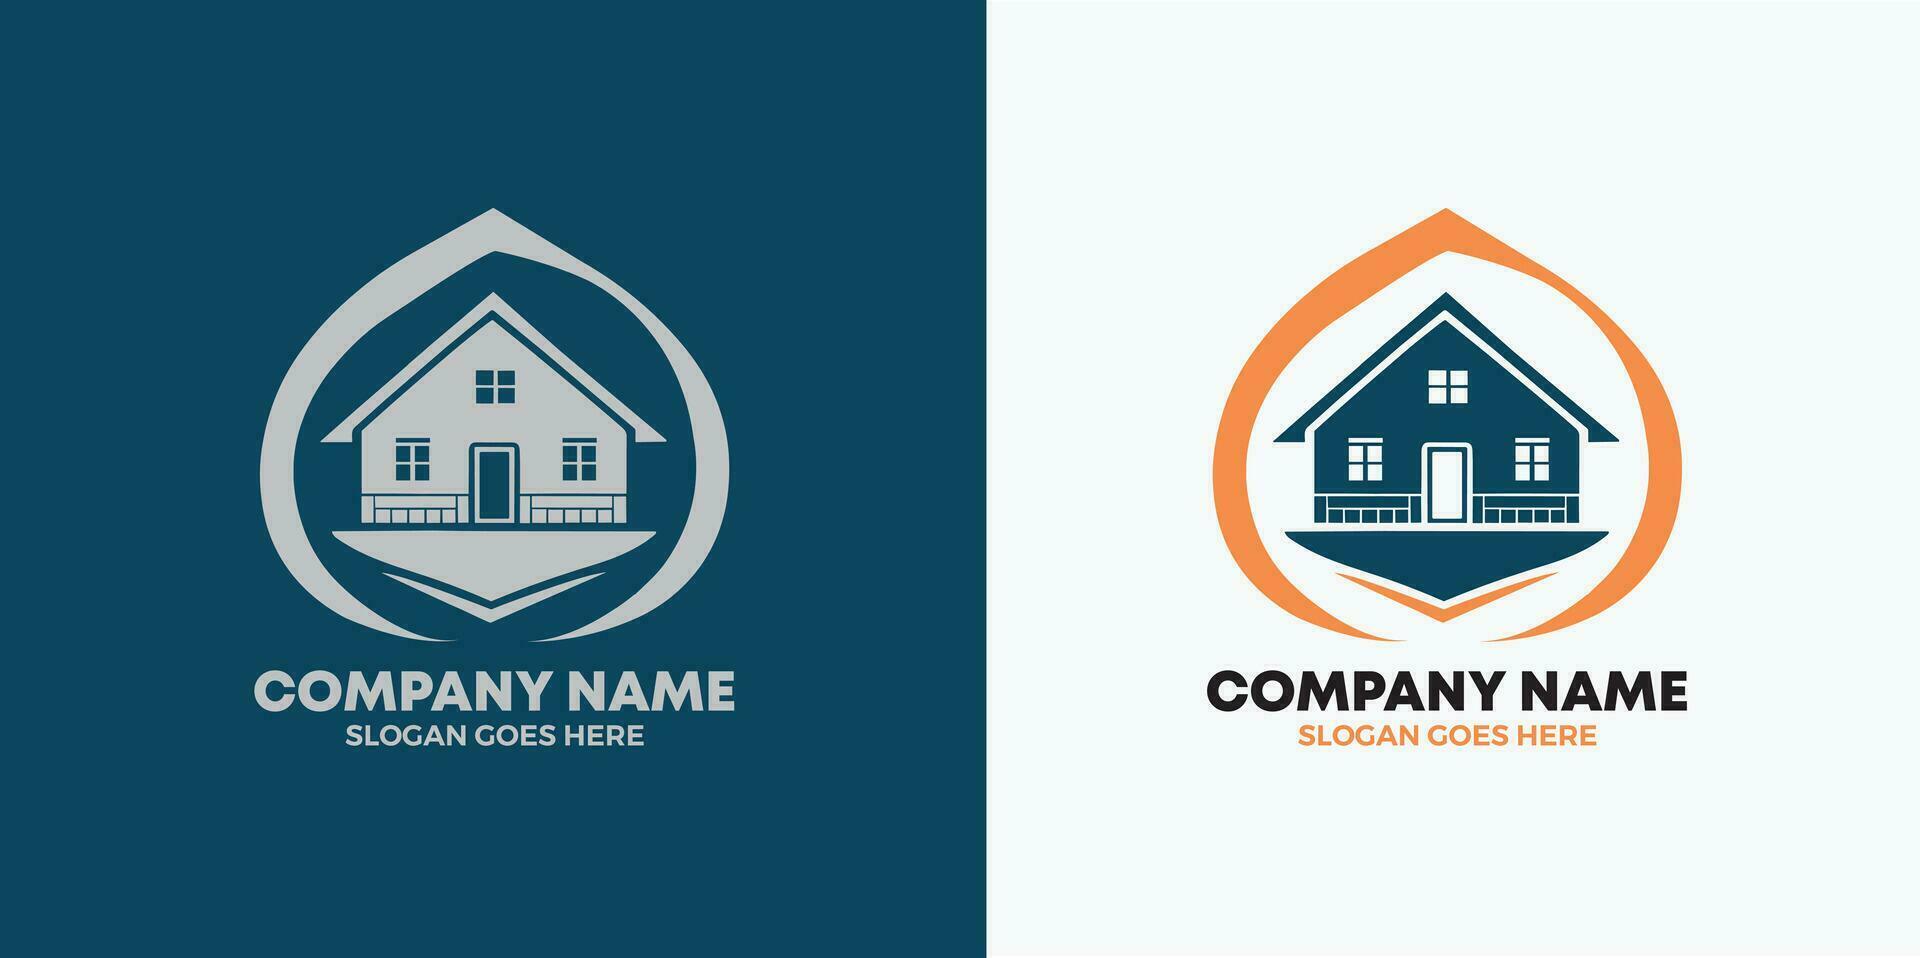 Property logo icon for project identity. Free vector